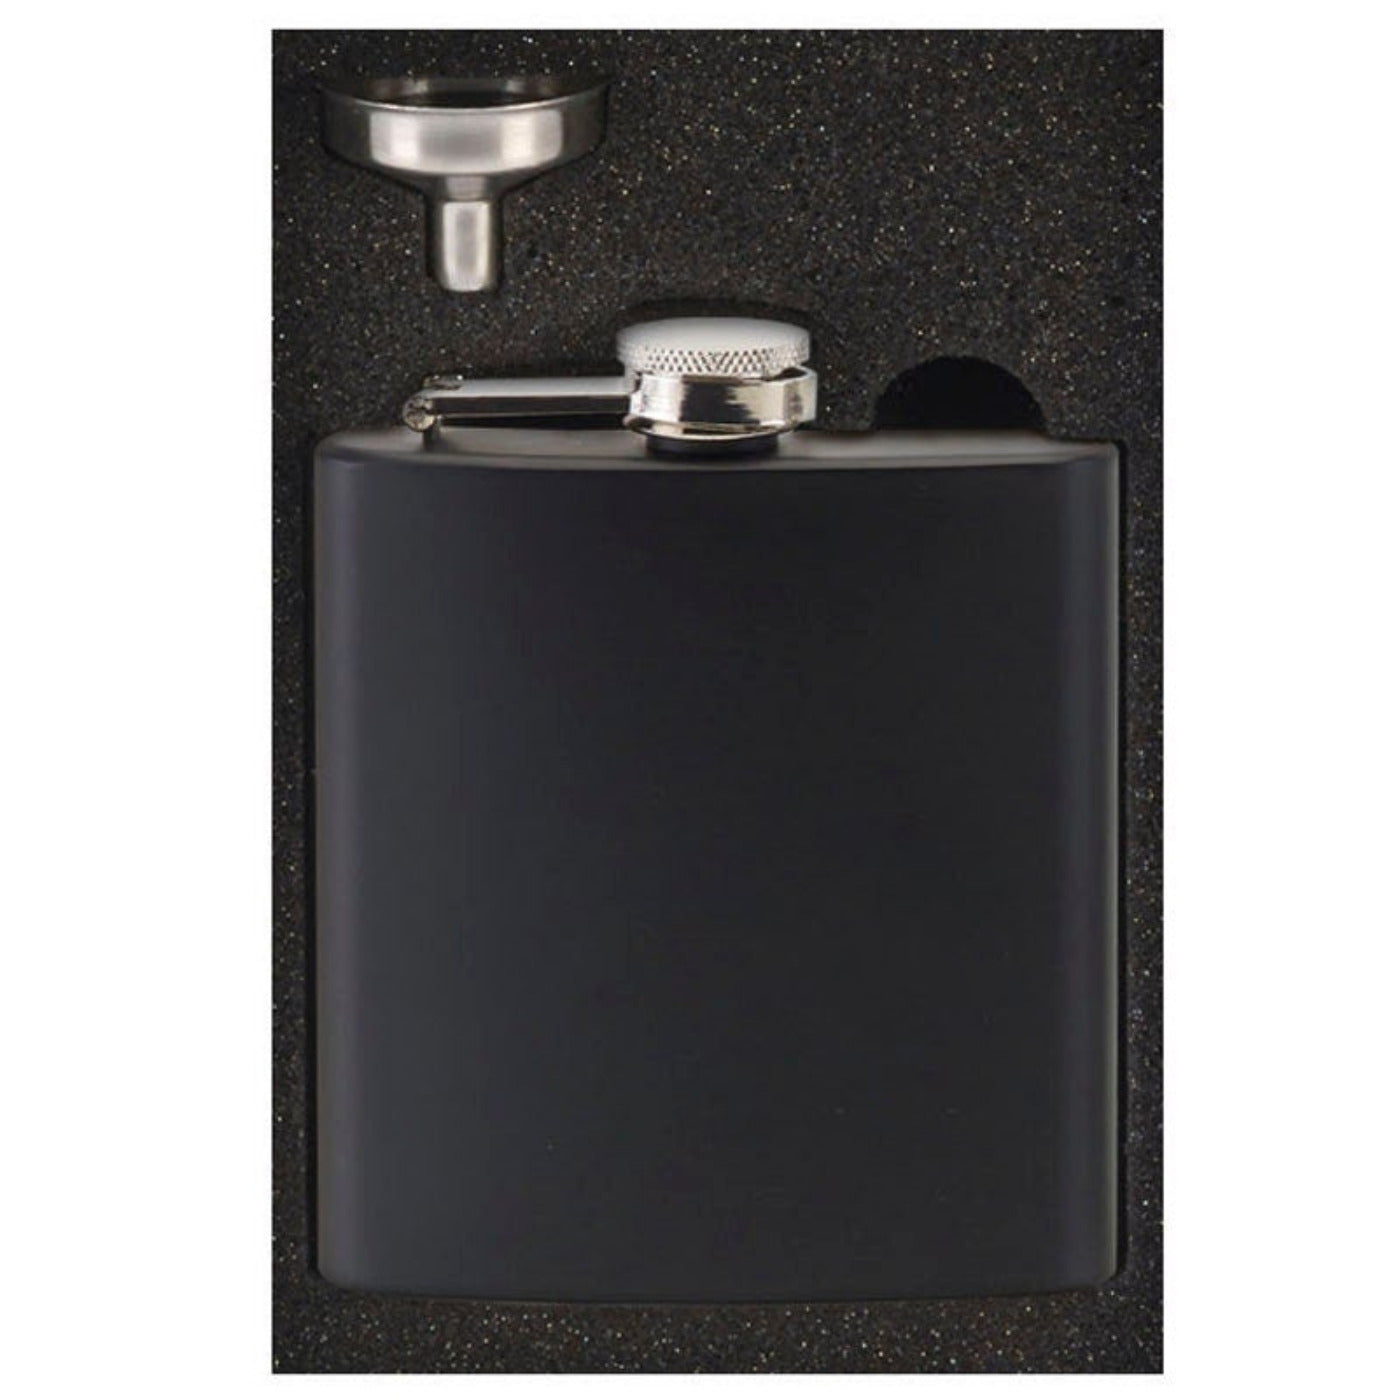 Personalised Classy Black Wedding Party Hip Flask